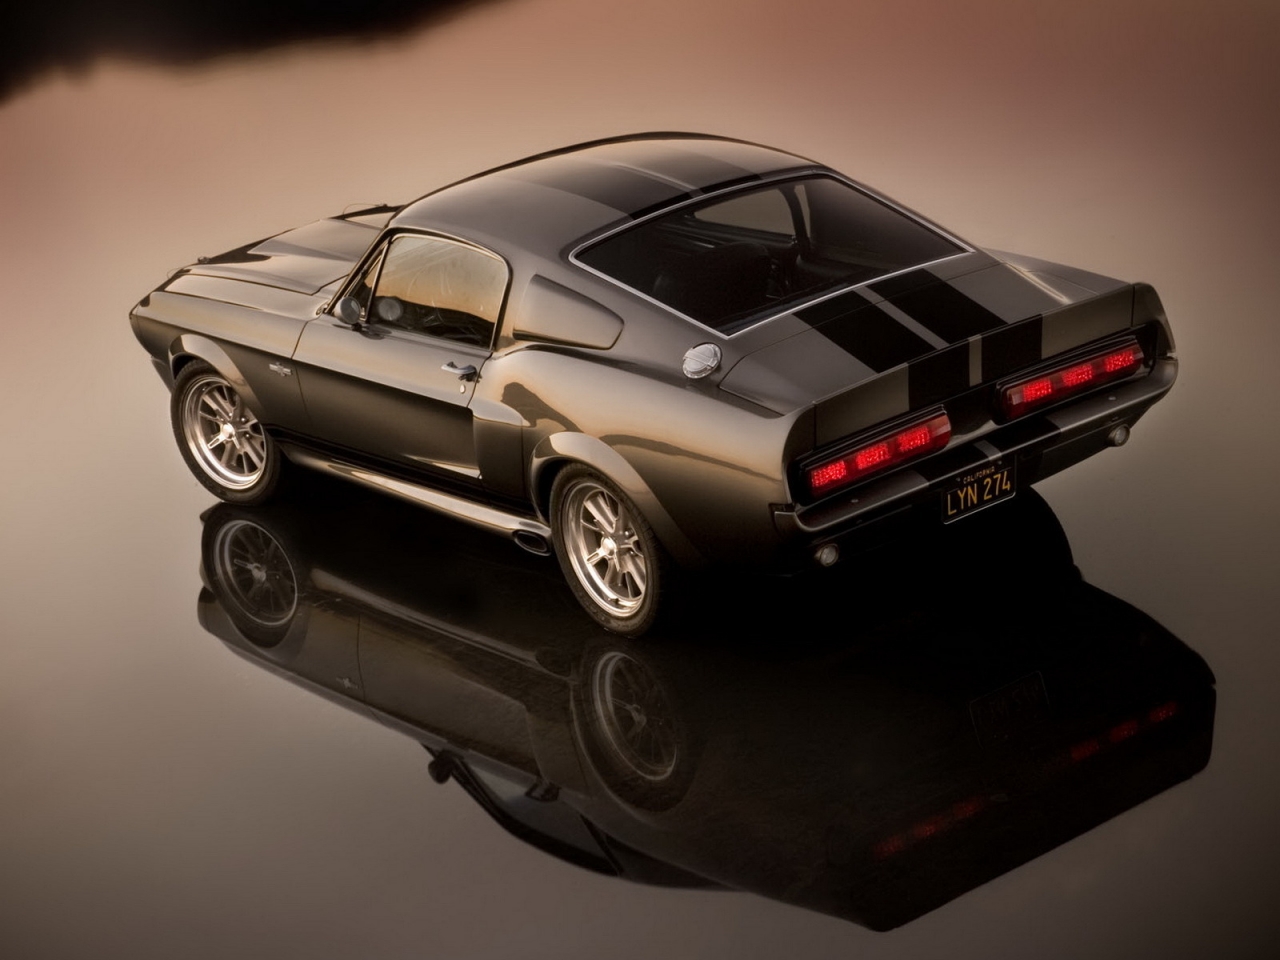 Mustang GT500 for 1280 x 960 resolution